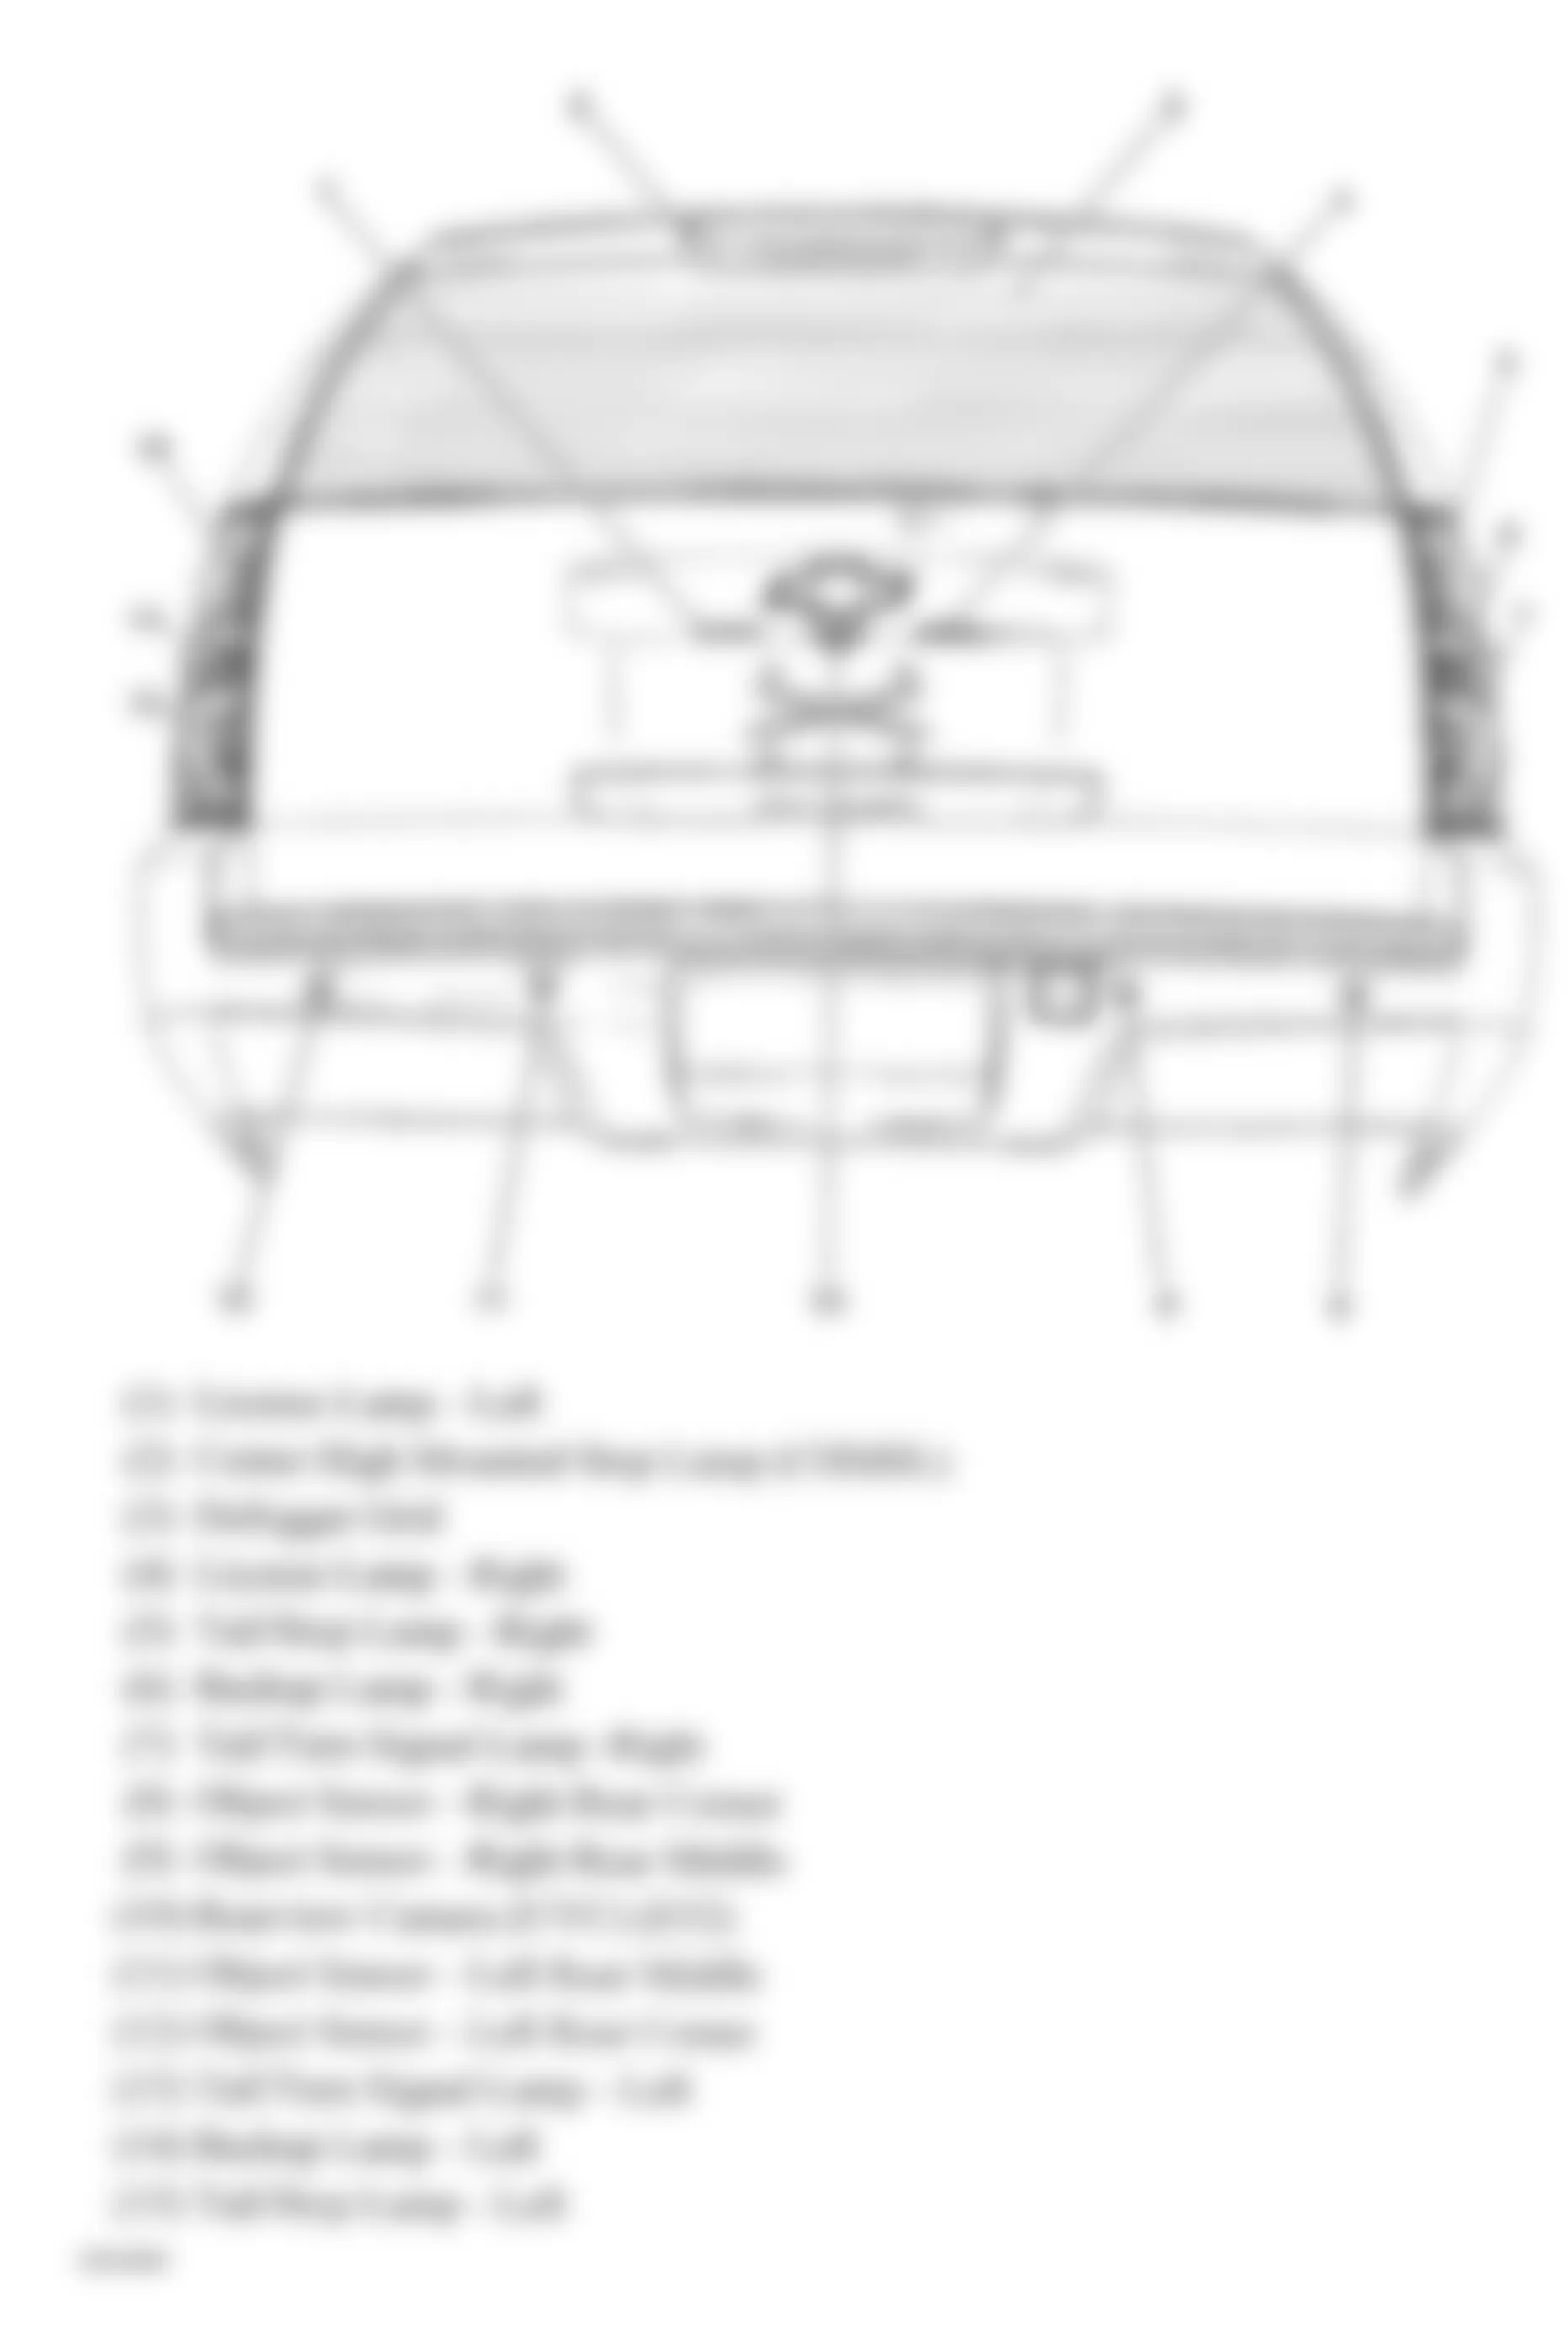 Chevrolet Suburban C2500 2008 - Component Locations -  Rear Of Vehicle (Avalanche, Suburban & Tahoe W/One Piece Liftgate)